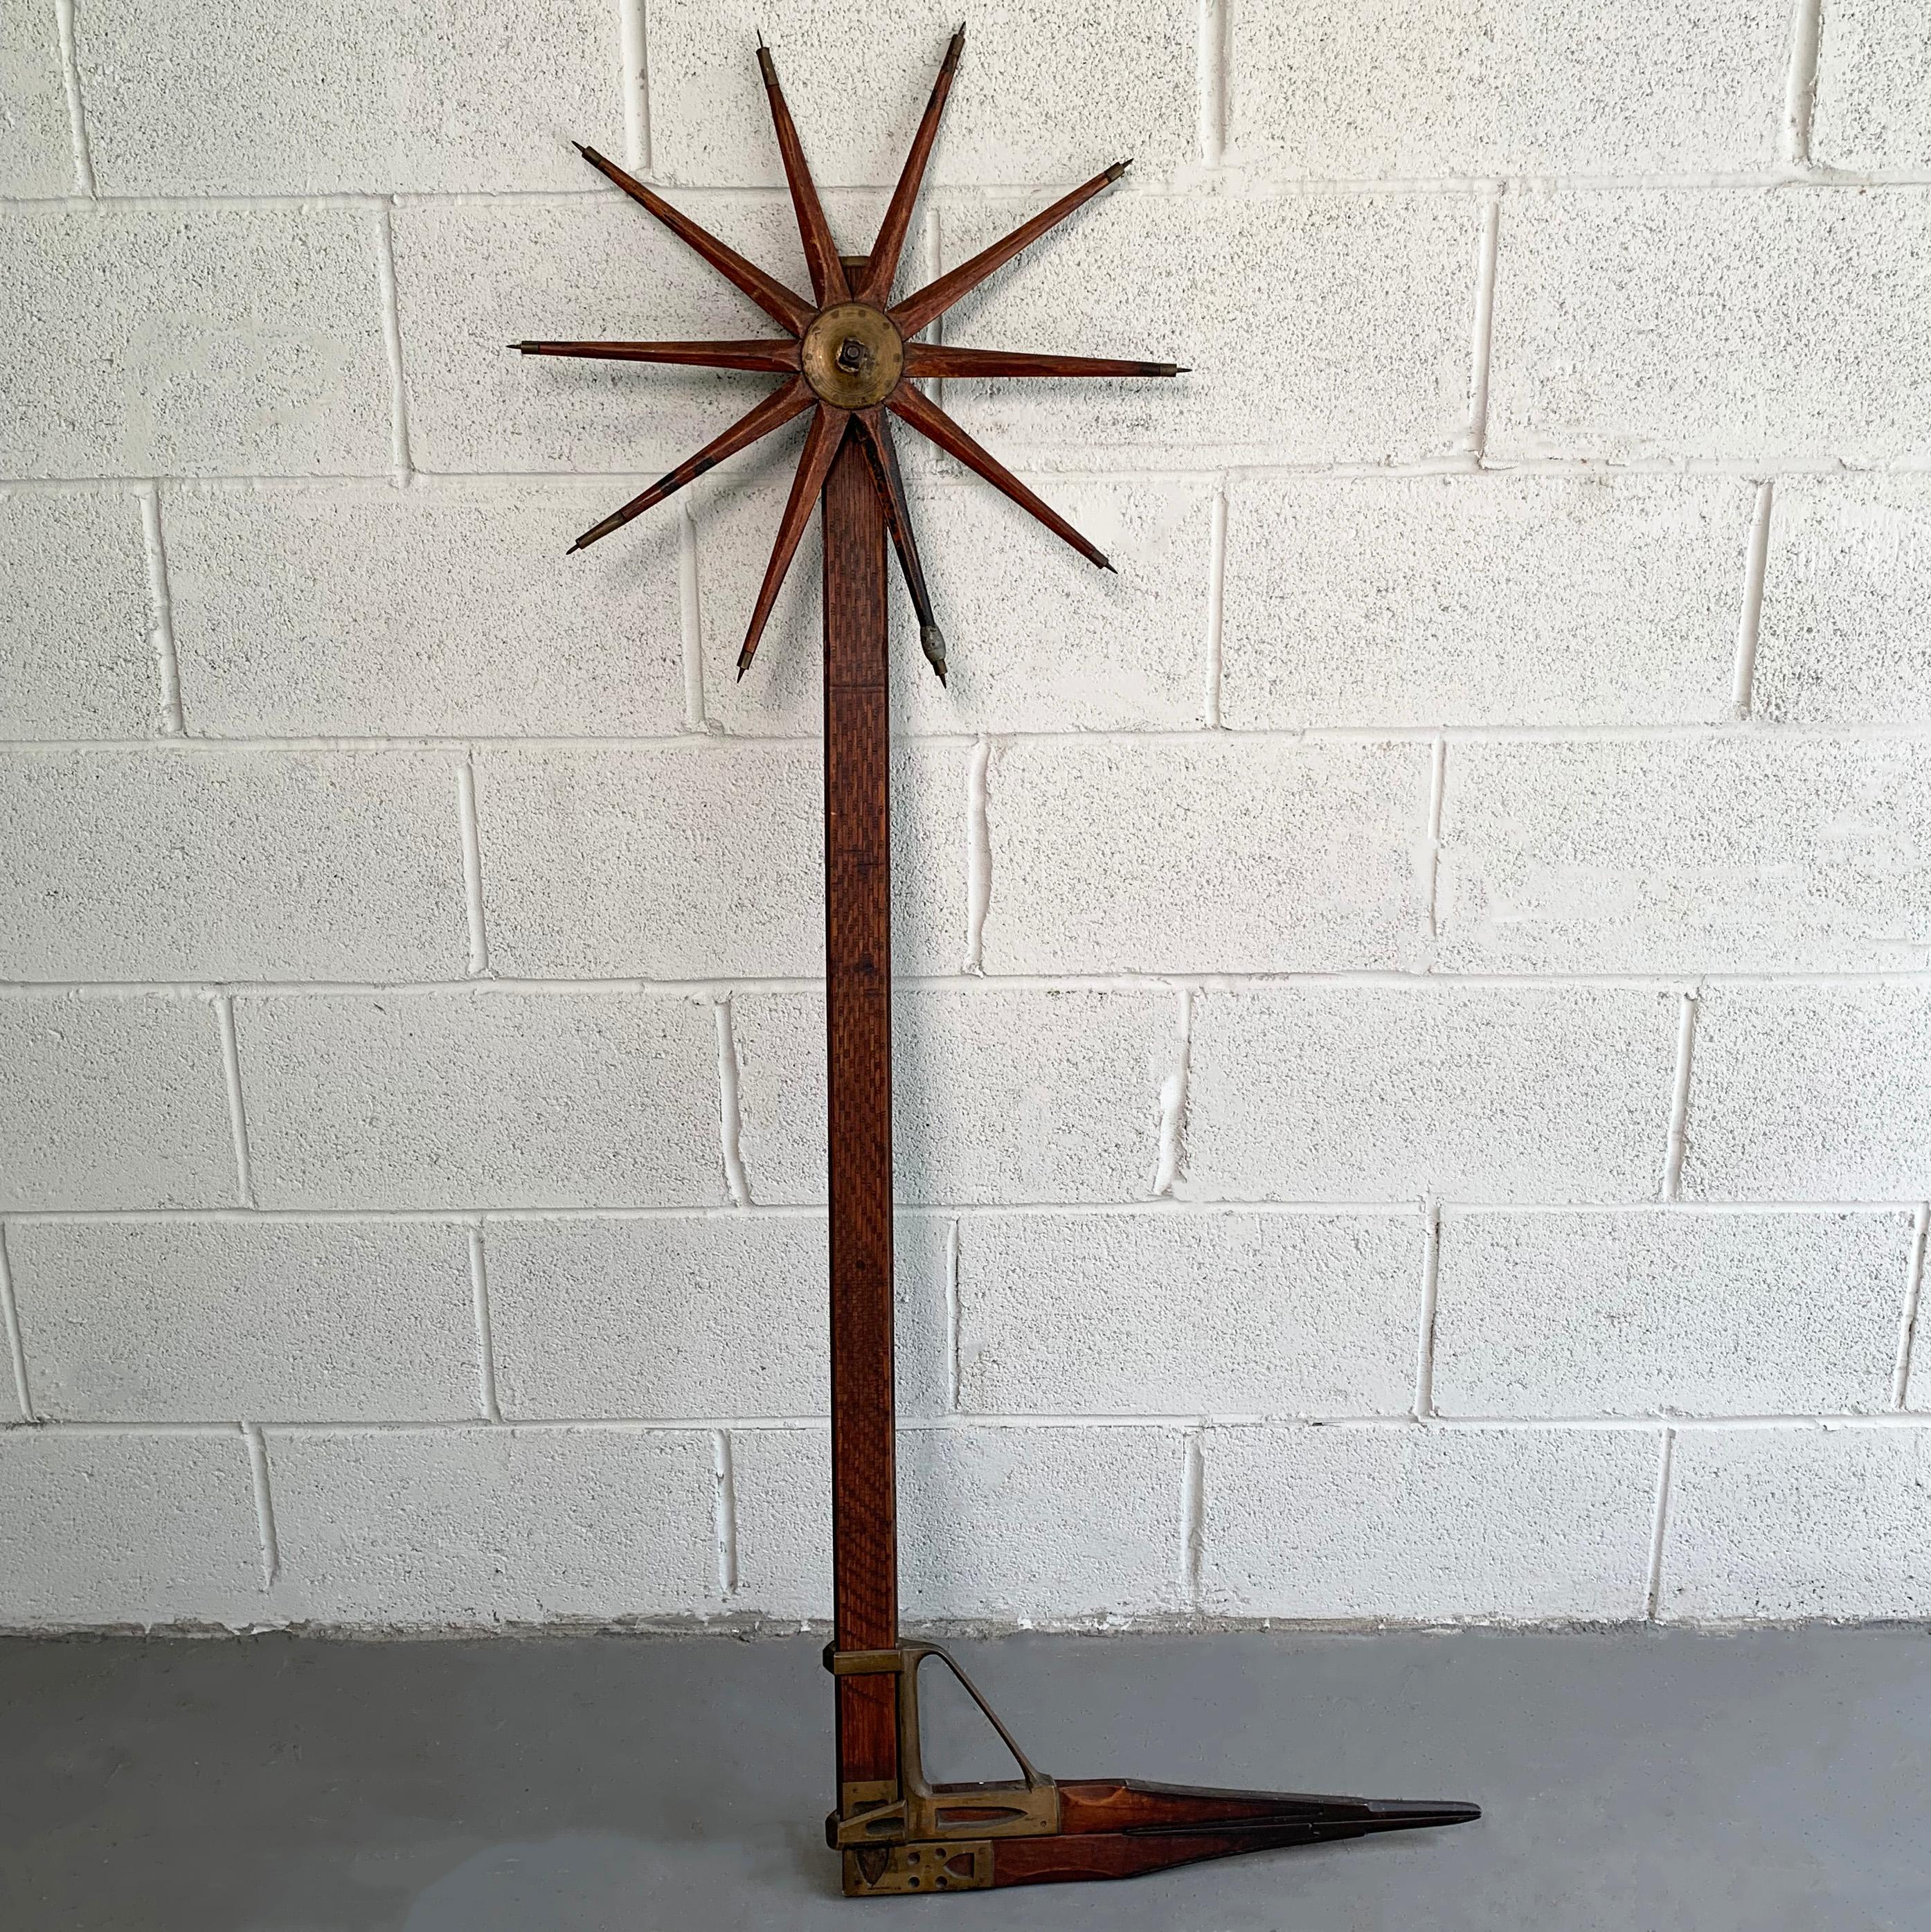 Turn of the 20th century, oak and handcrafted brass, lumber caliper by William Greenlief used to measure the amount of timber from a tree features a sliding caliper and spiked walking wheel.